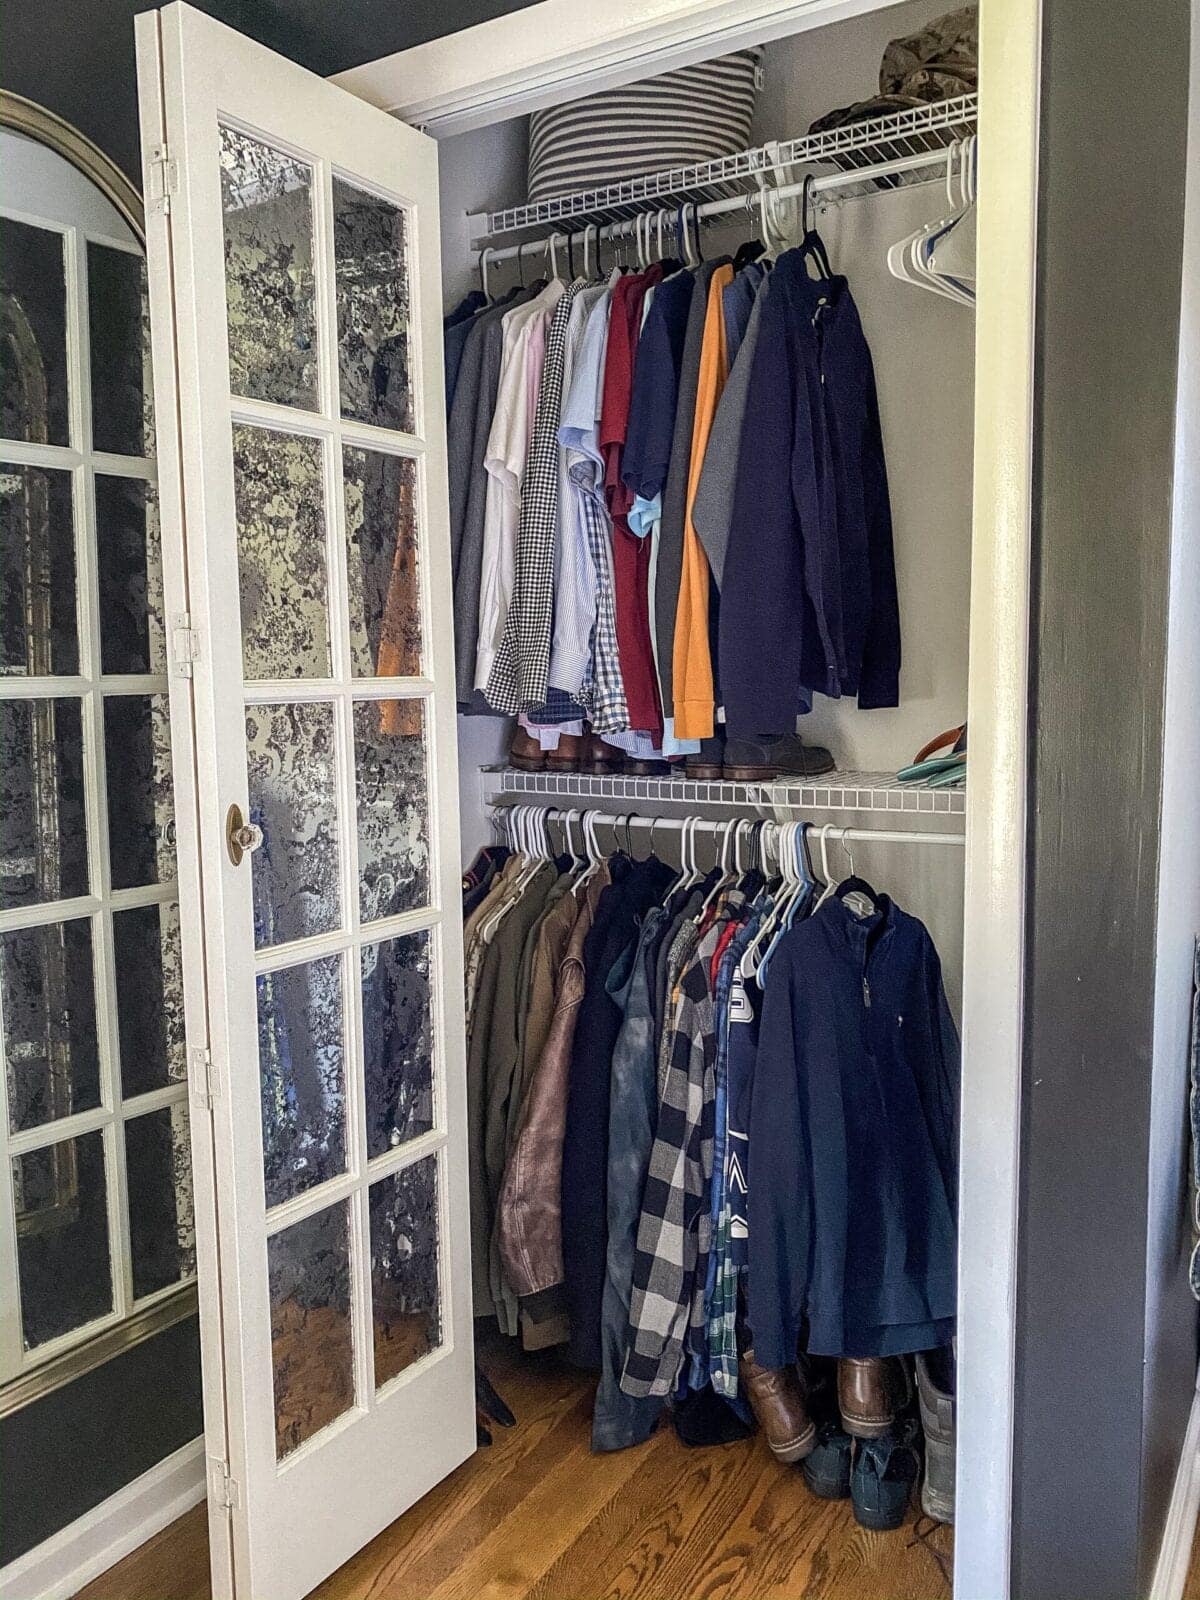 IKEA Closets Using Billy Bookcases | A step-by-step tutorial and budget breakdown for using IKEA Billy bookcases to customize his & her closets in a master bedroom. 